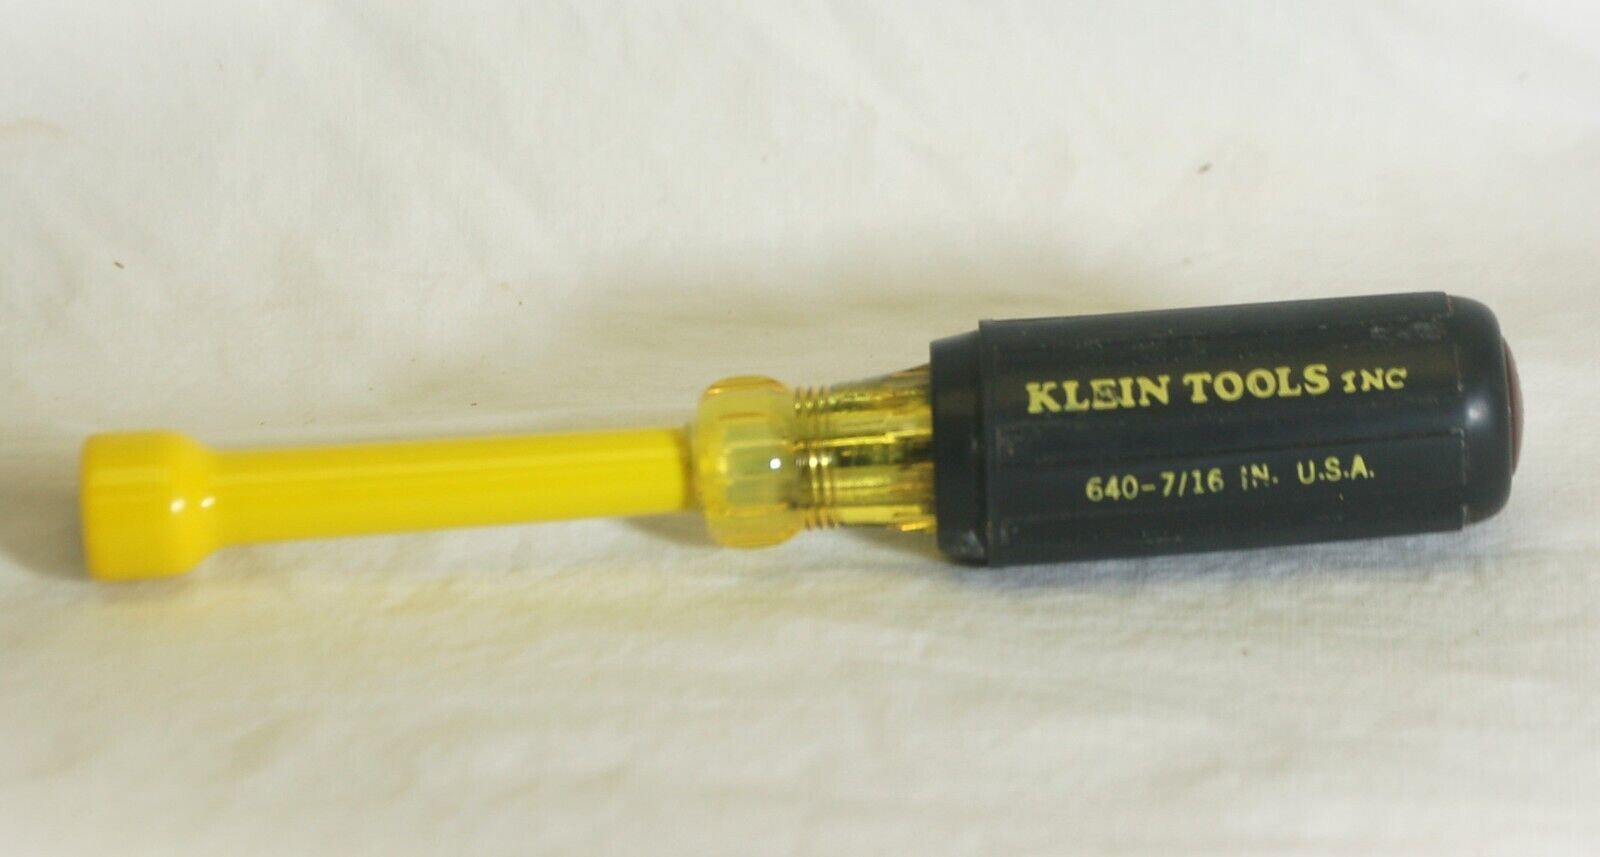 Primary image for Klein Tools Nut Driver 640 7/16" Insulated USA